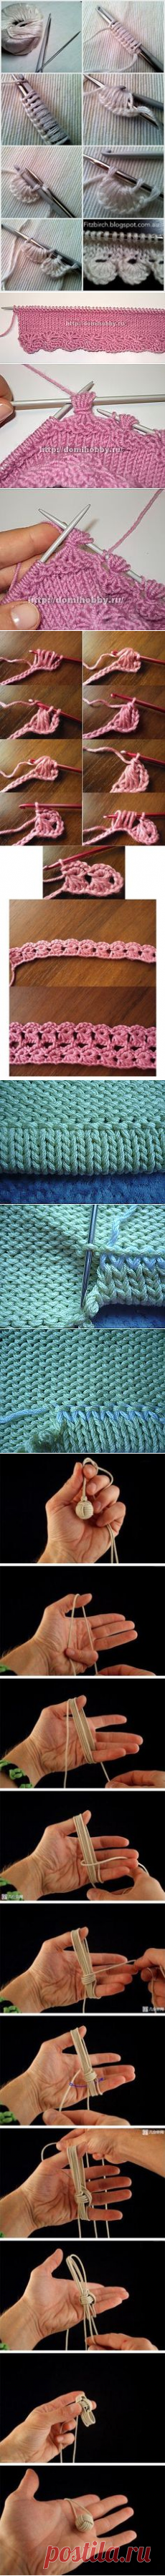 (85) Scalloped Knitting Edge Stitch - How Did You Make This? | Luxe DIY | Knitting